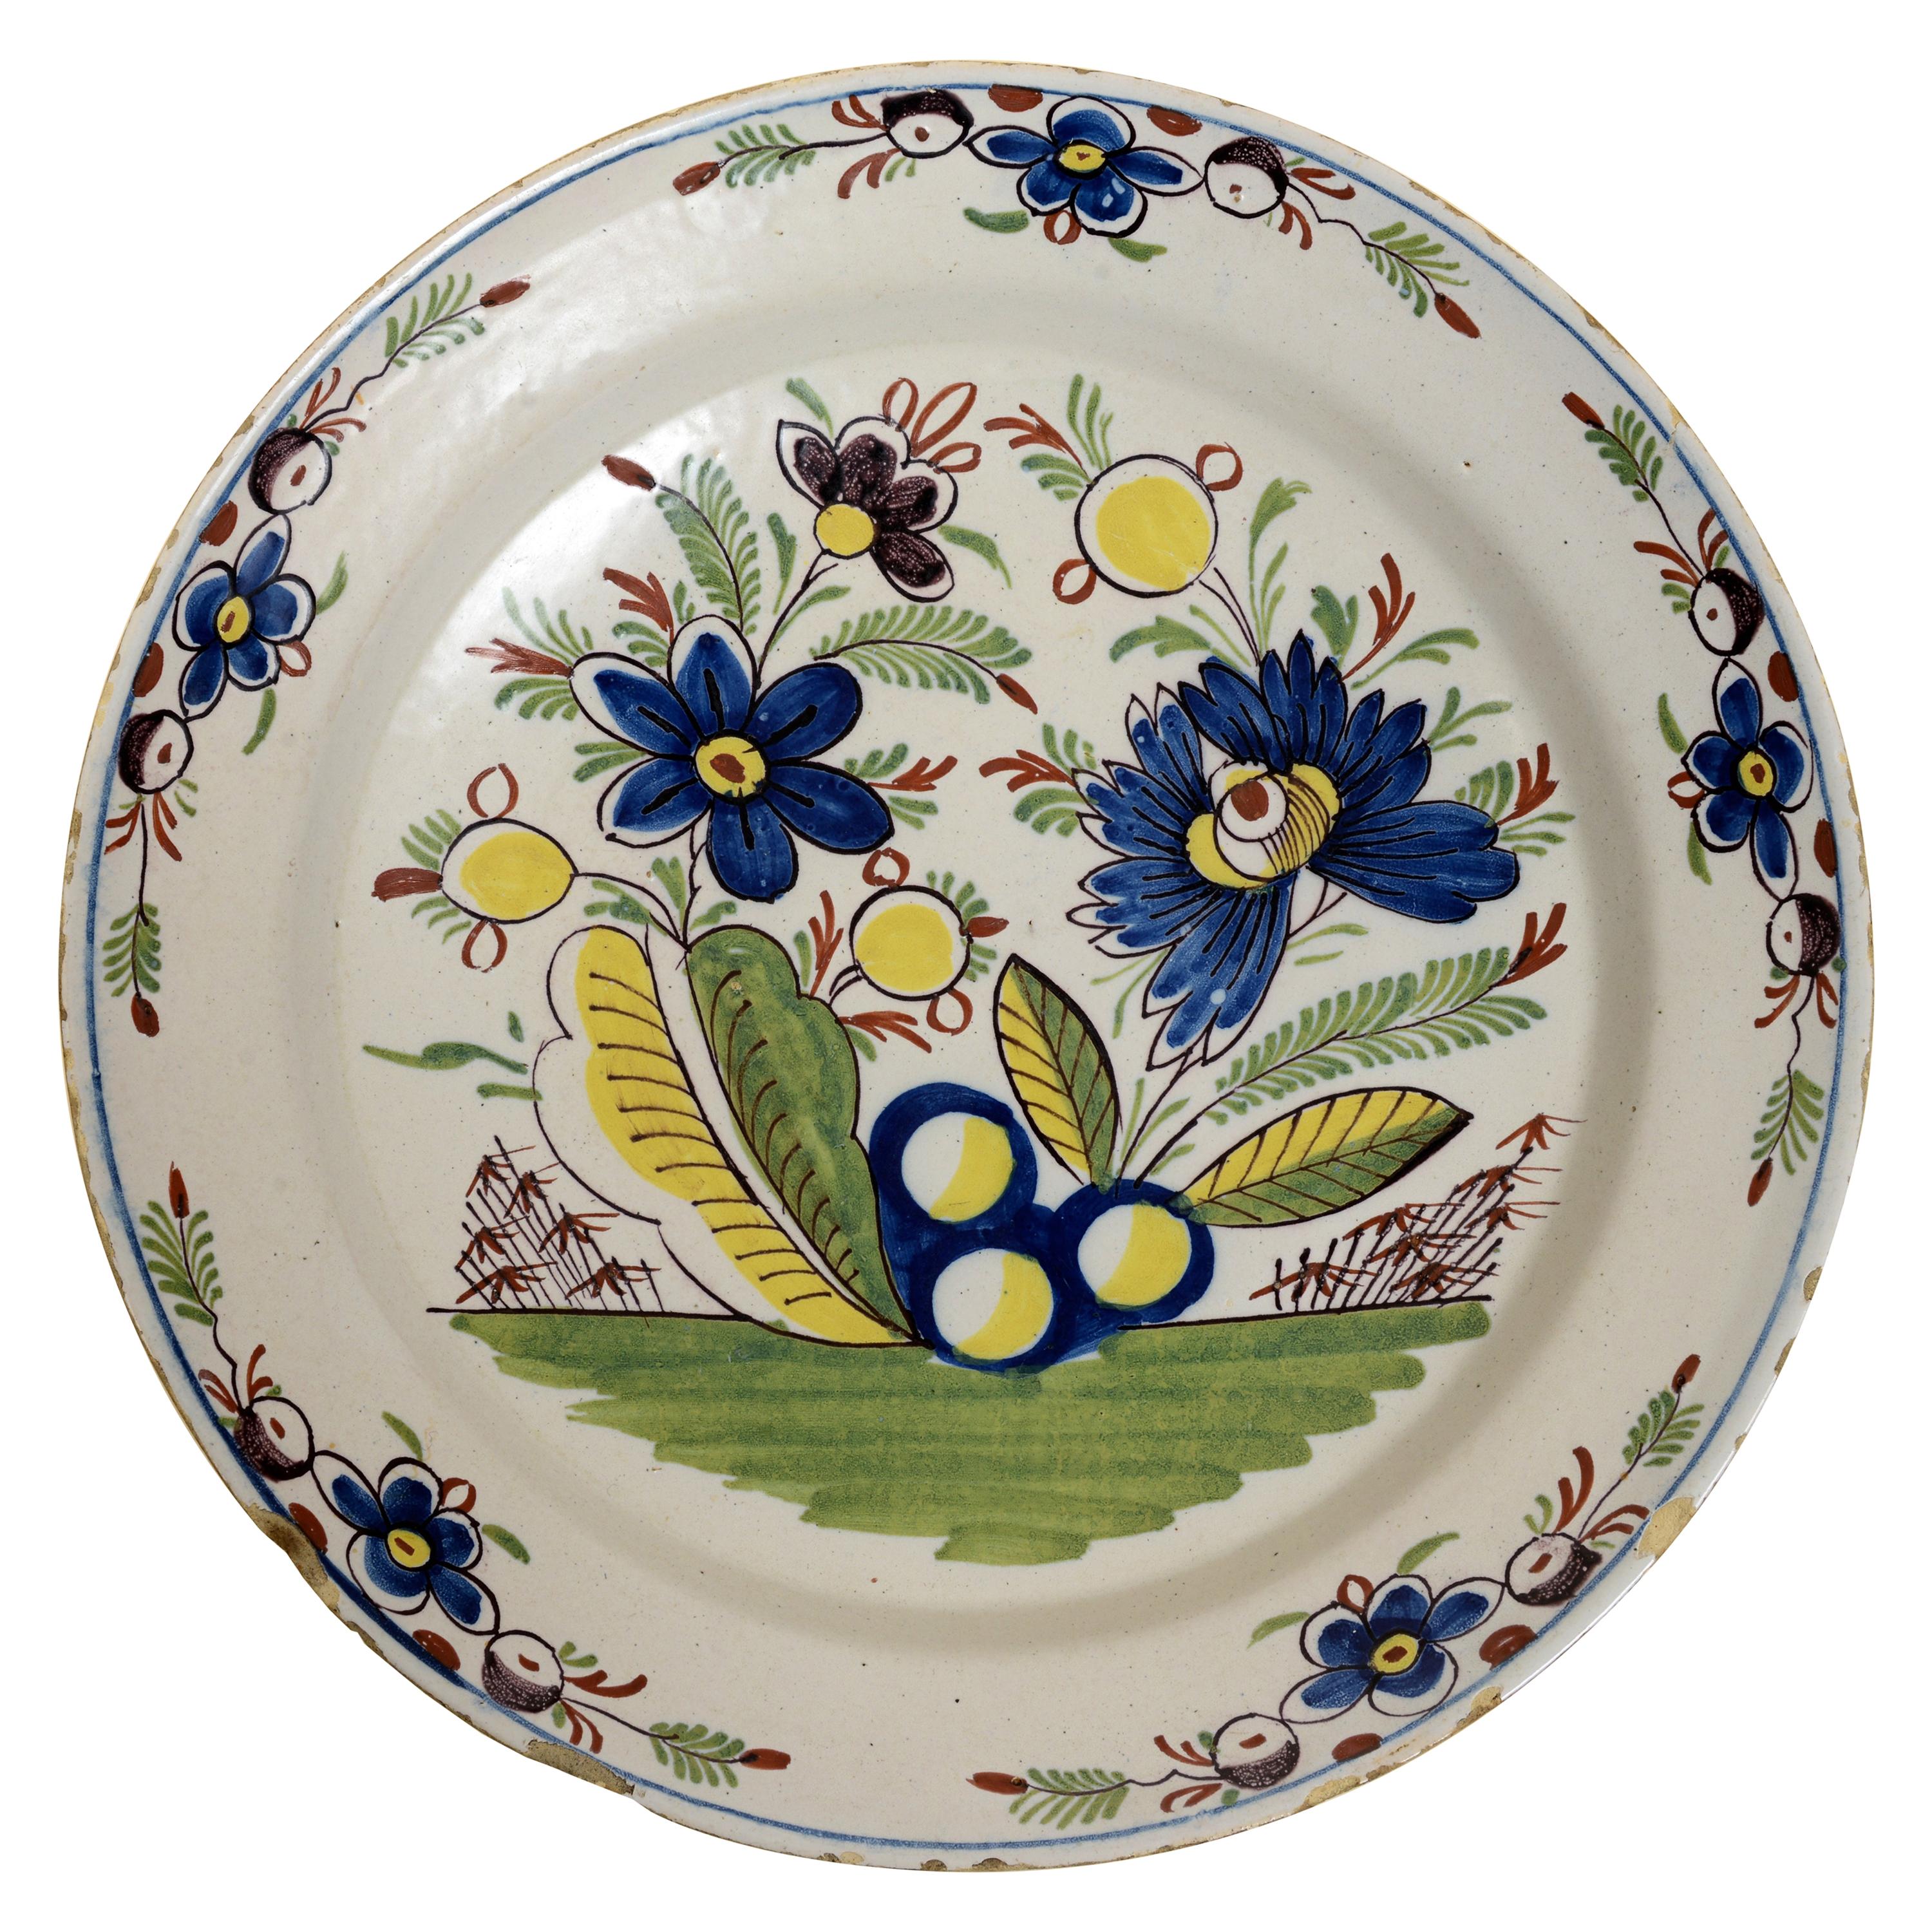 Fine 18th c Dutch Polychrome Painted Delft Charger